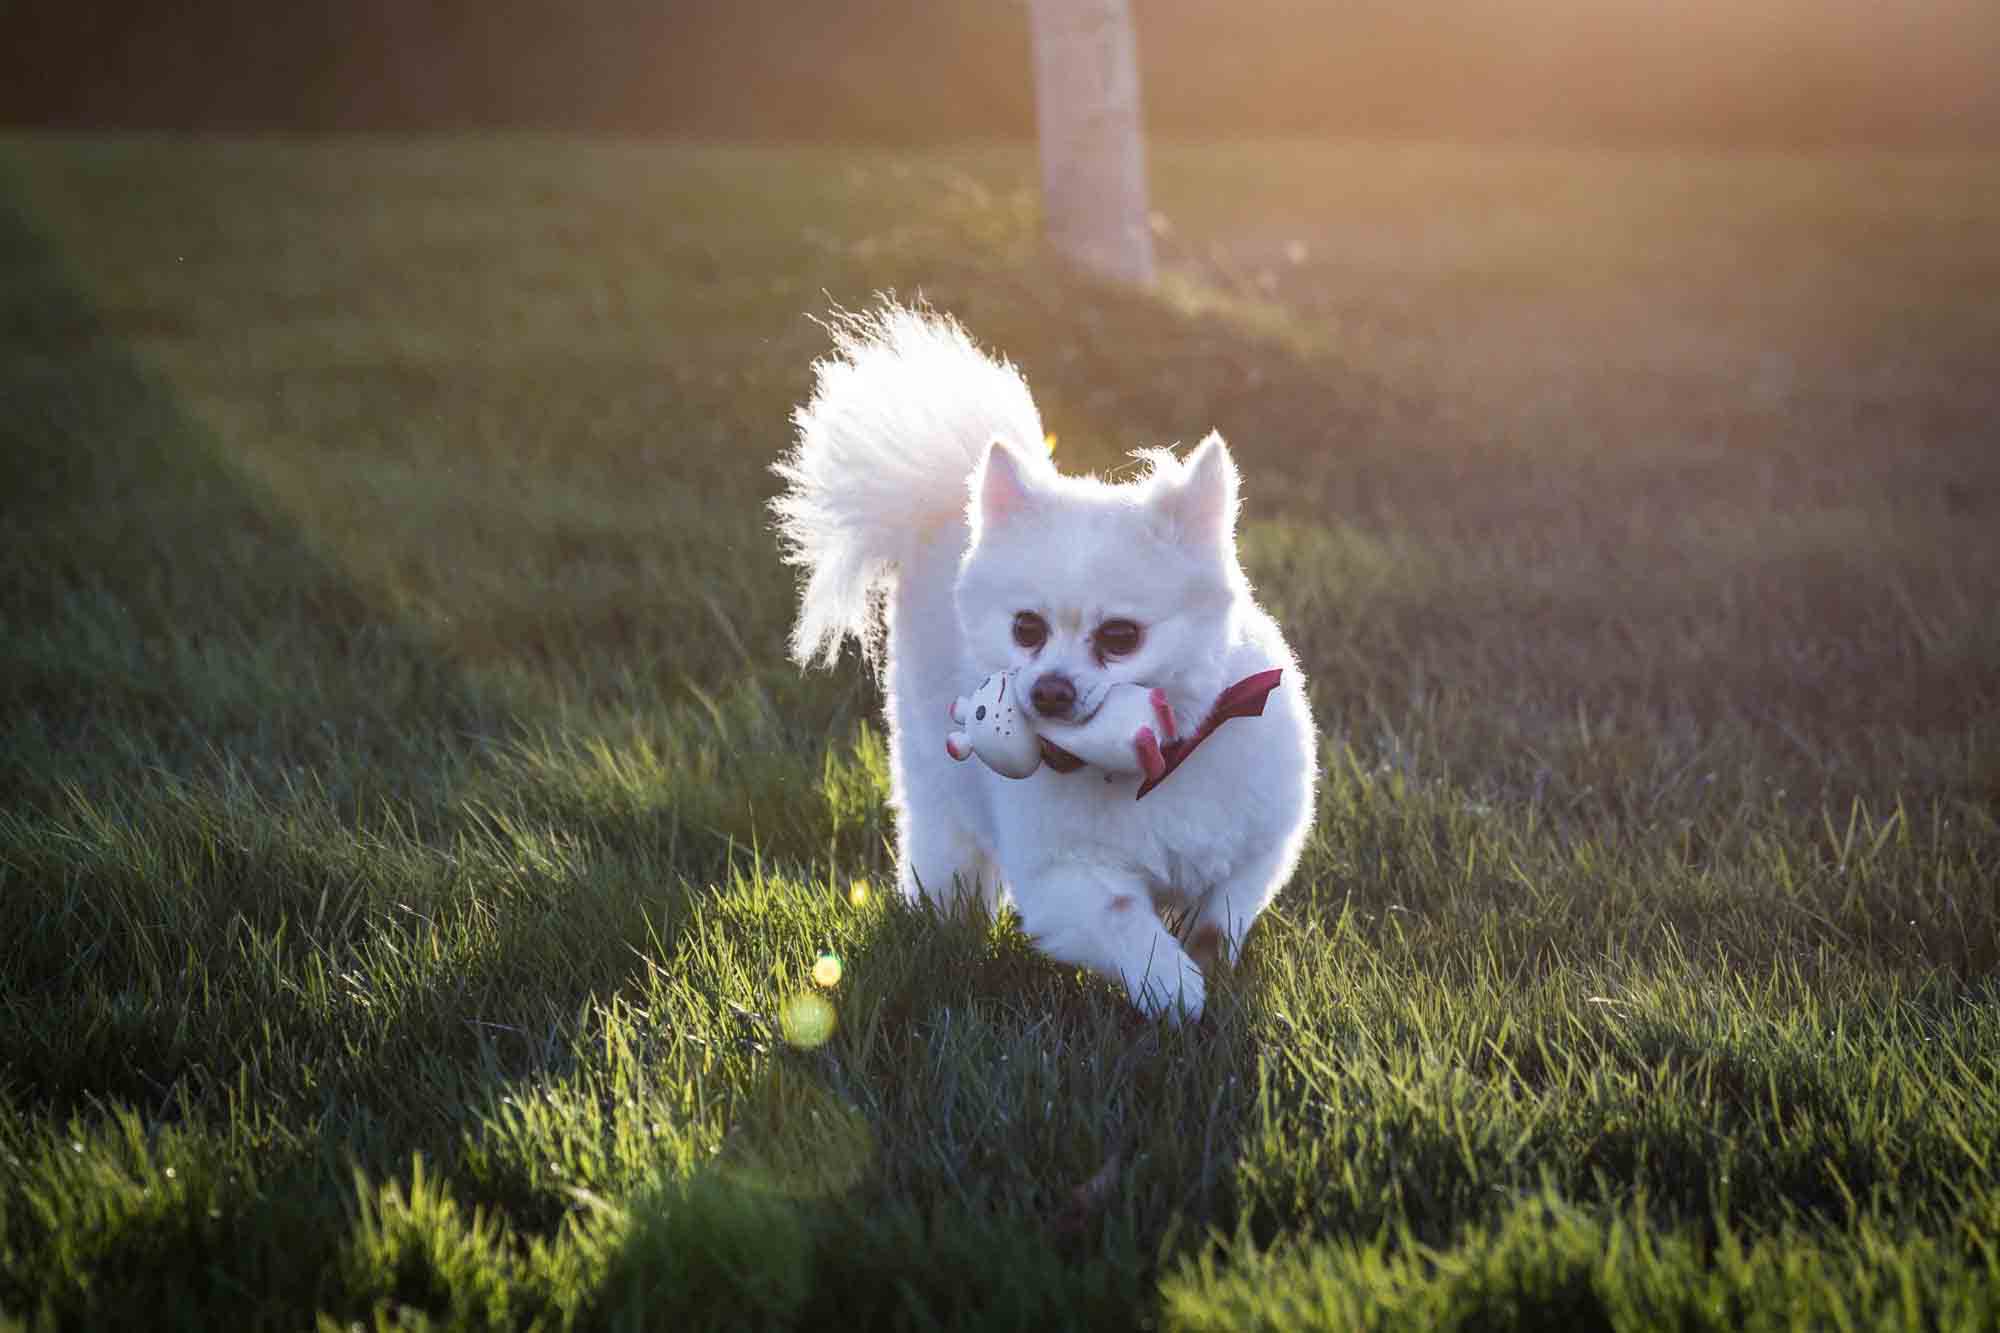 White Pomeranian dog in grass holding squeaky toy on Governors Island